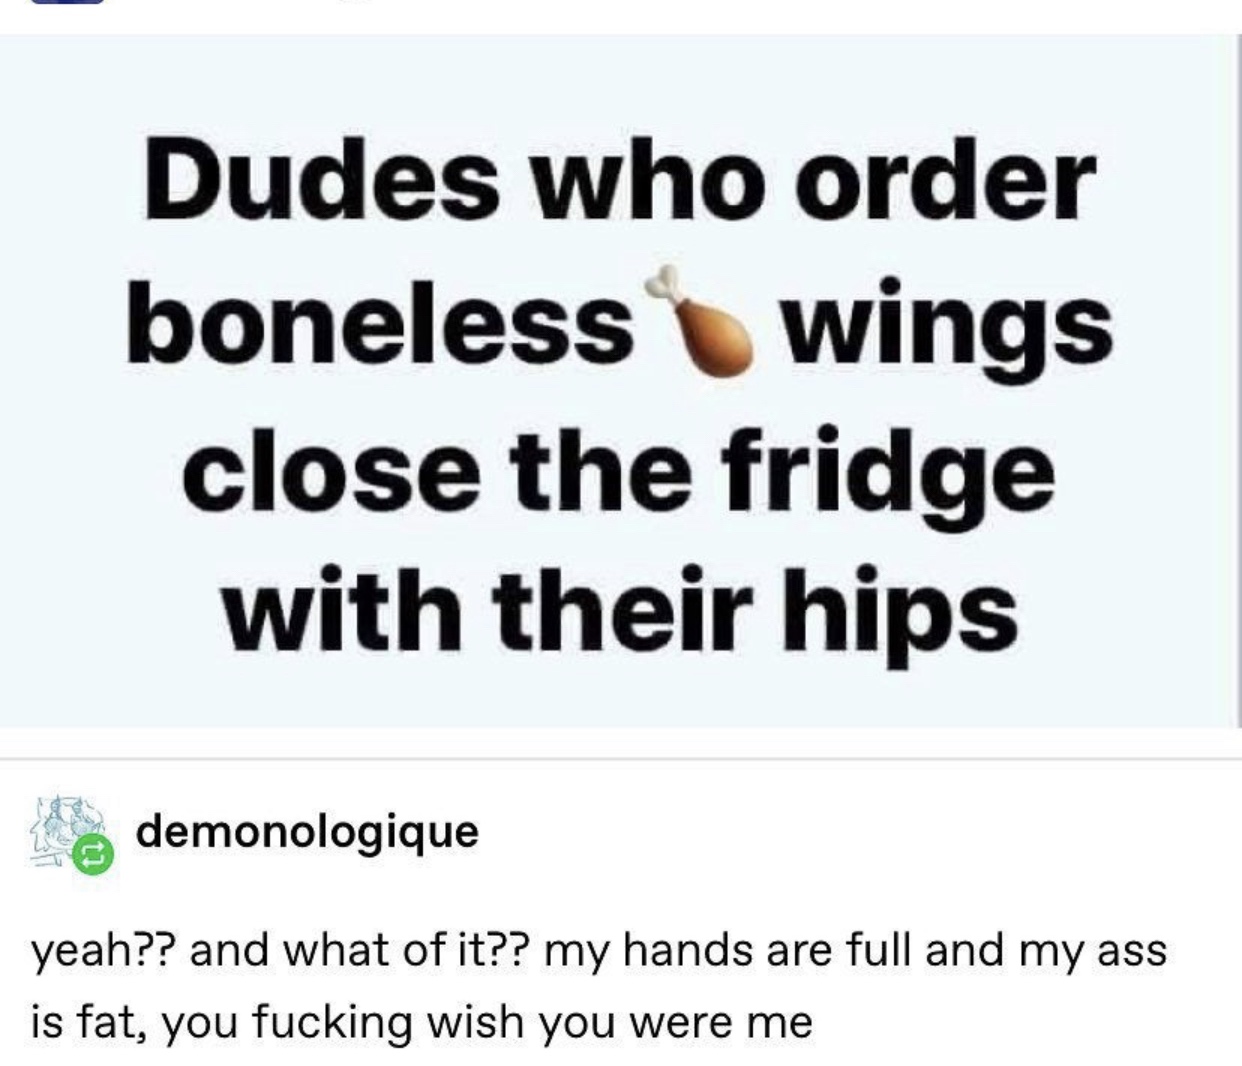 document - Dudes who order boneless wings close the fridge with their hips demonologique yeah?? and what of it?? my hands are full and my ass is fat, you fucking wish you were me